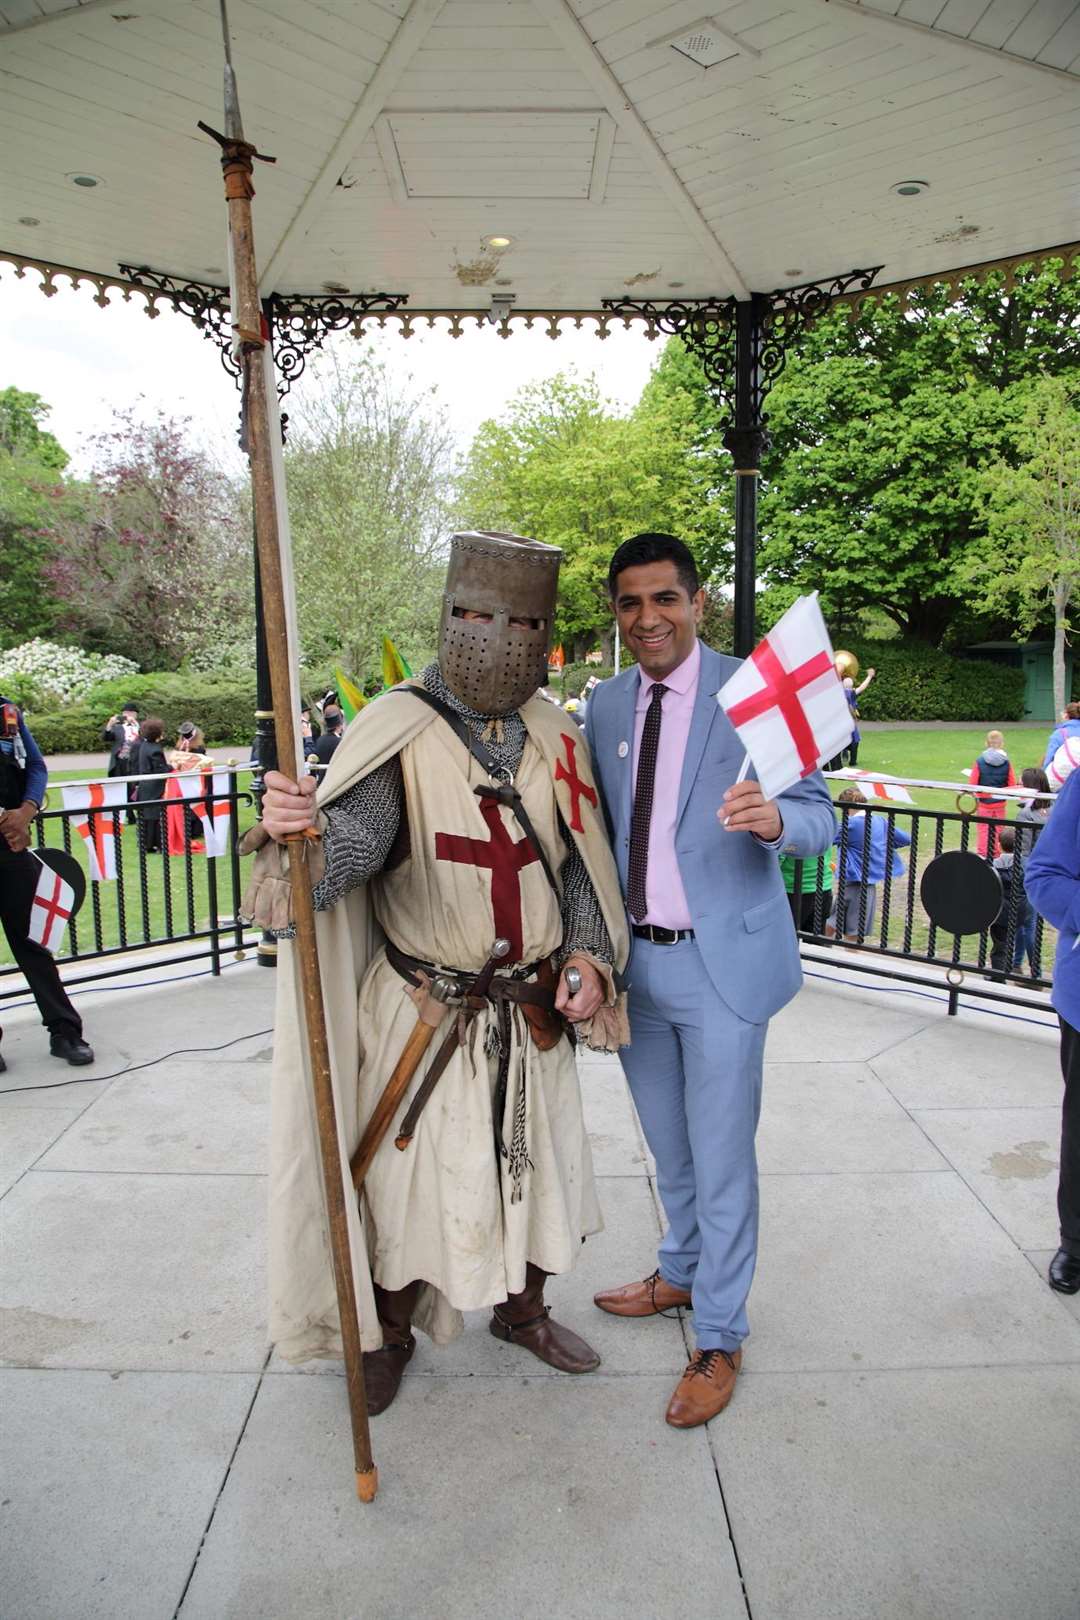 An armoured St George impersonator (left) with Gurvinder Sandher (right)